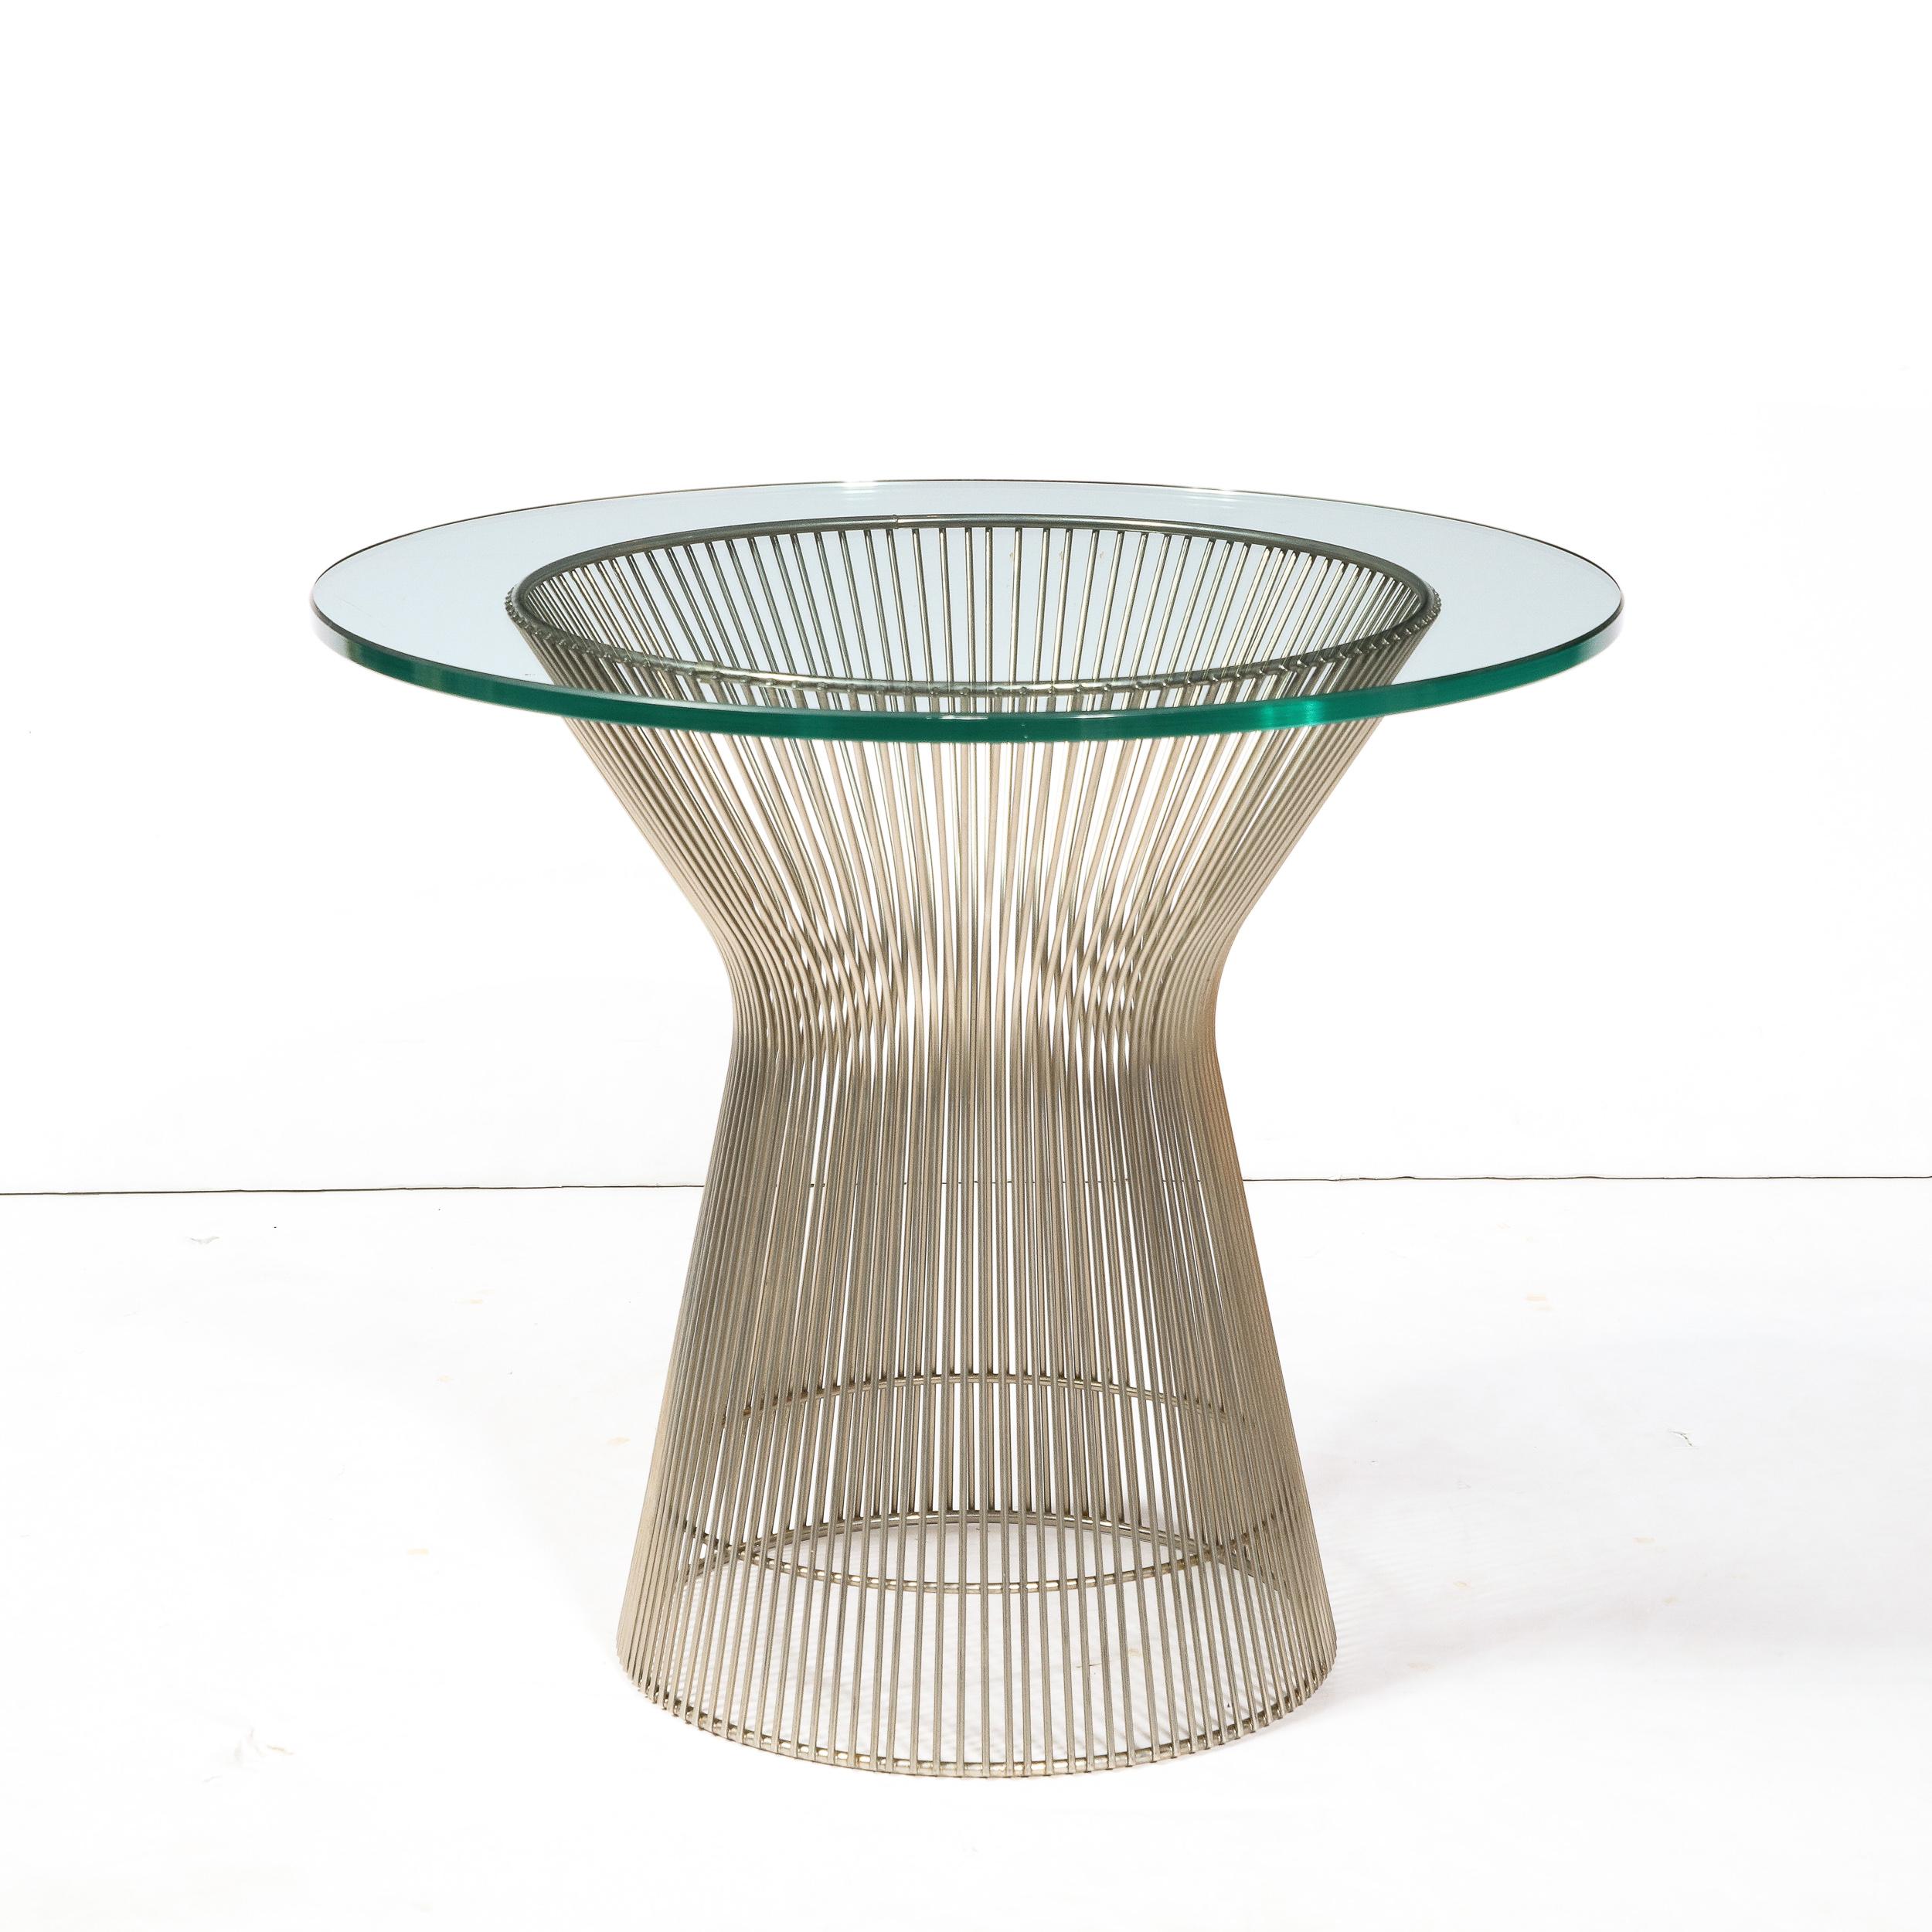 Pair of Mid-Century Modernist Polished Nickel Side Tables by Warren Platner For Sale 3